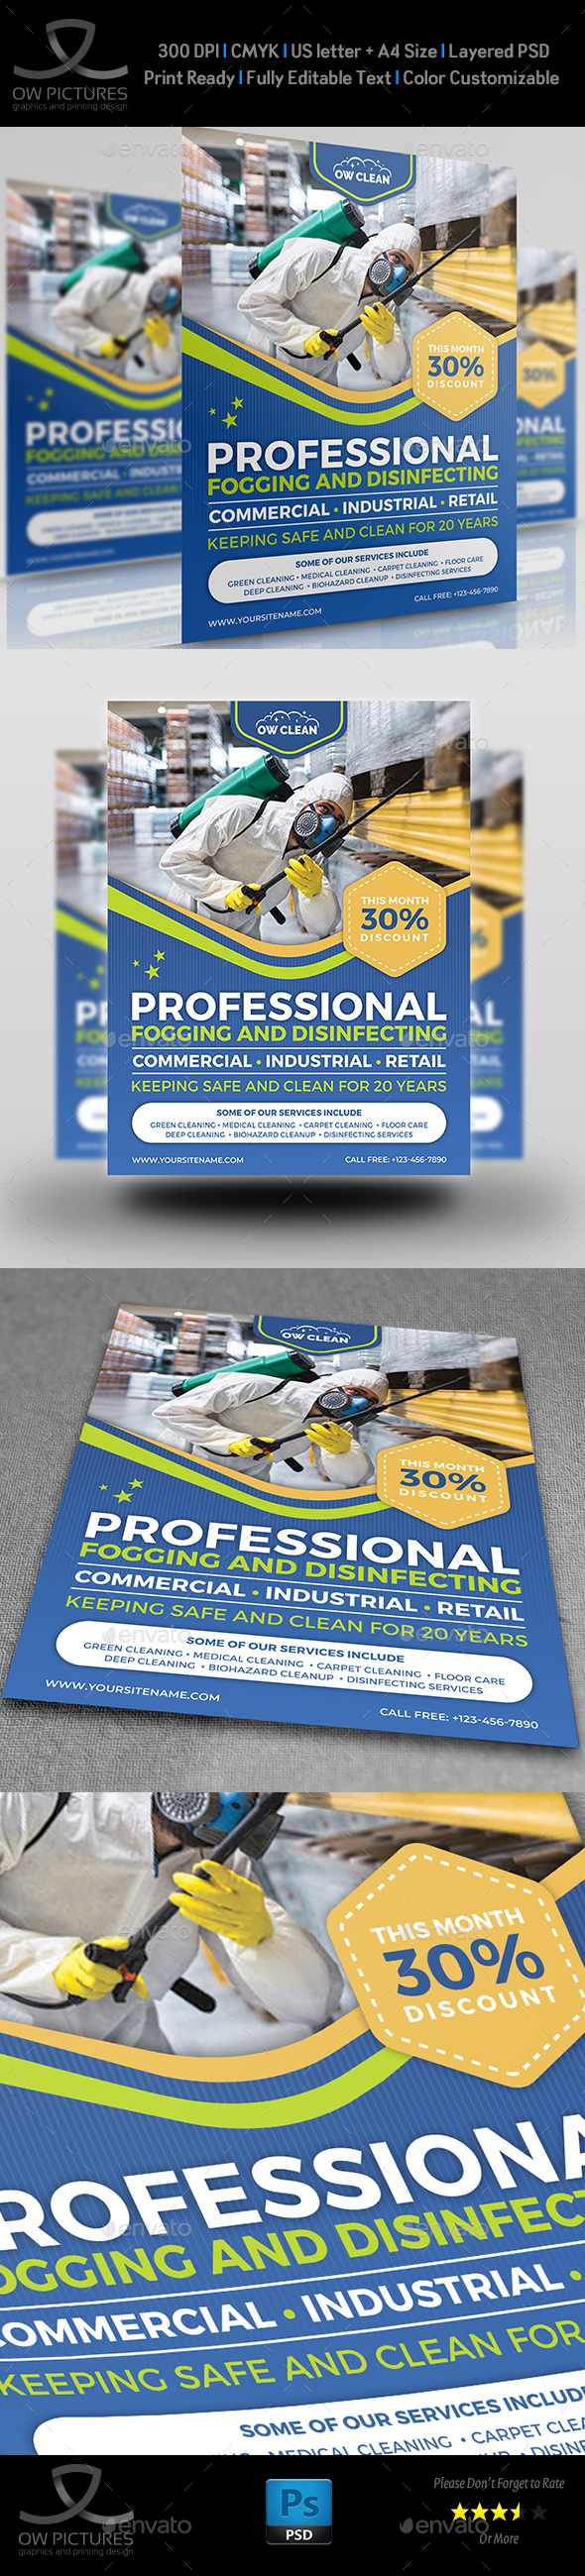 Disinfecting and Cleaning Services Flyer Template